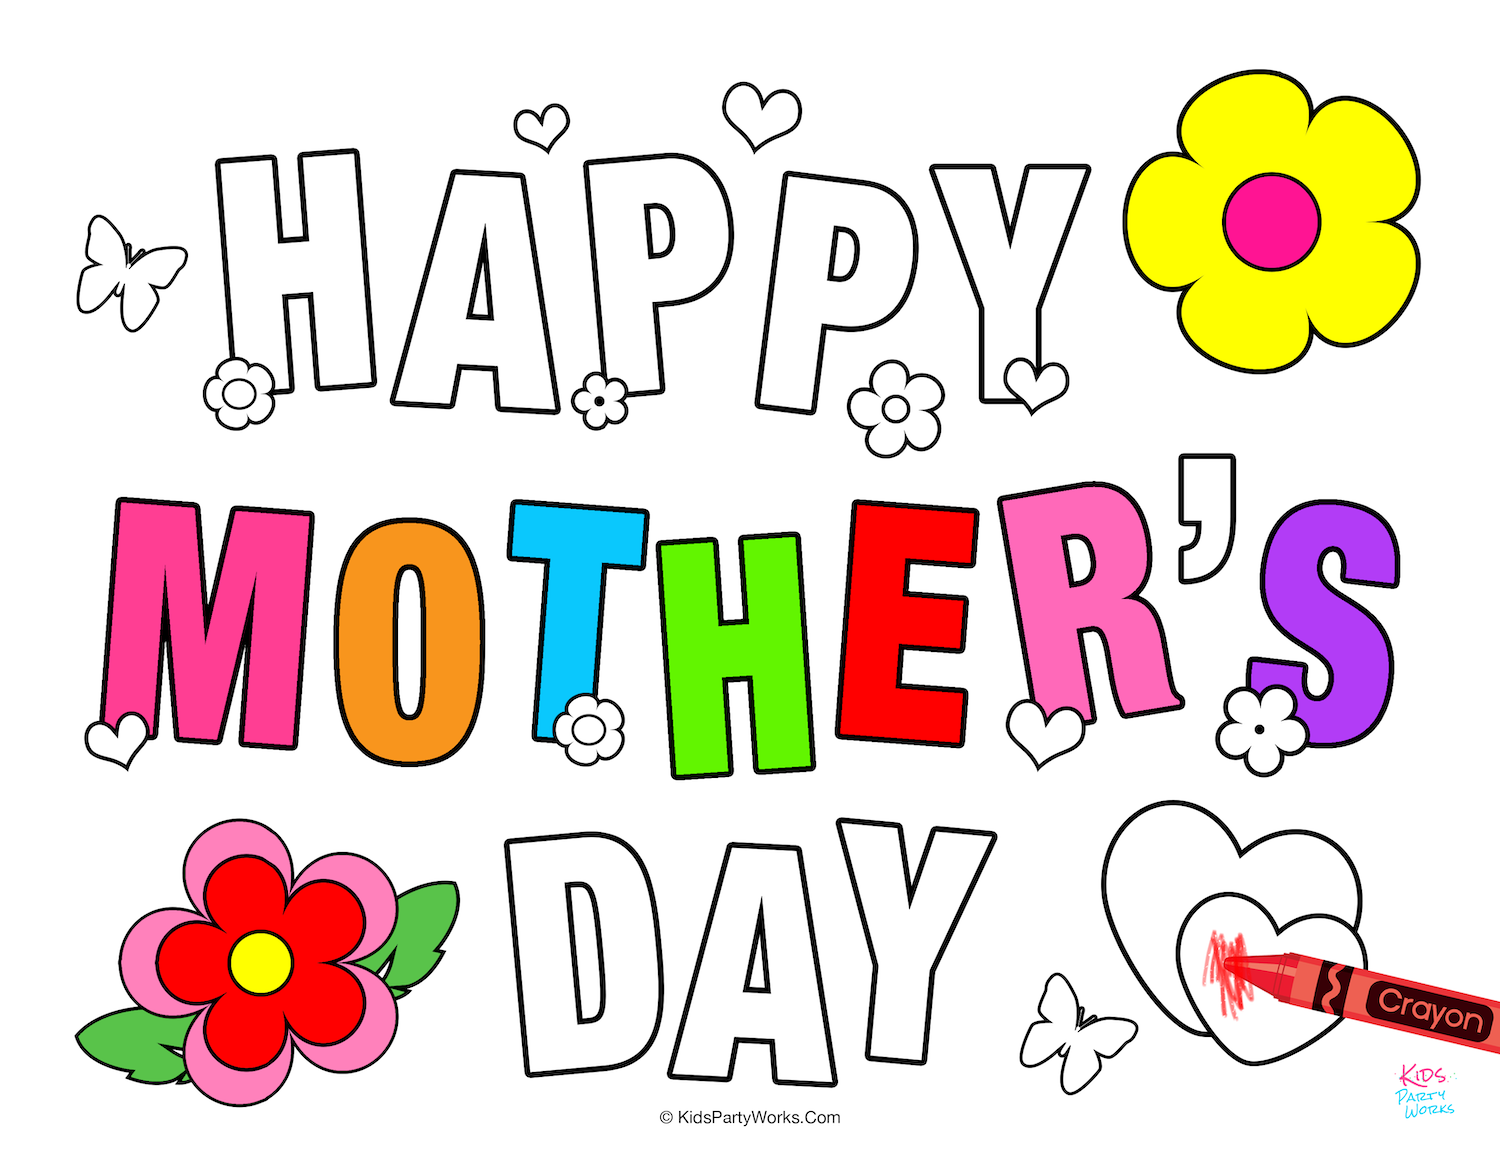 Free Happy Mother's Day Coloring Page. Little ones will love to color and give to their moms on Mother's Day. What a wonderful gift! KidsPartyWorks.Com